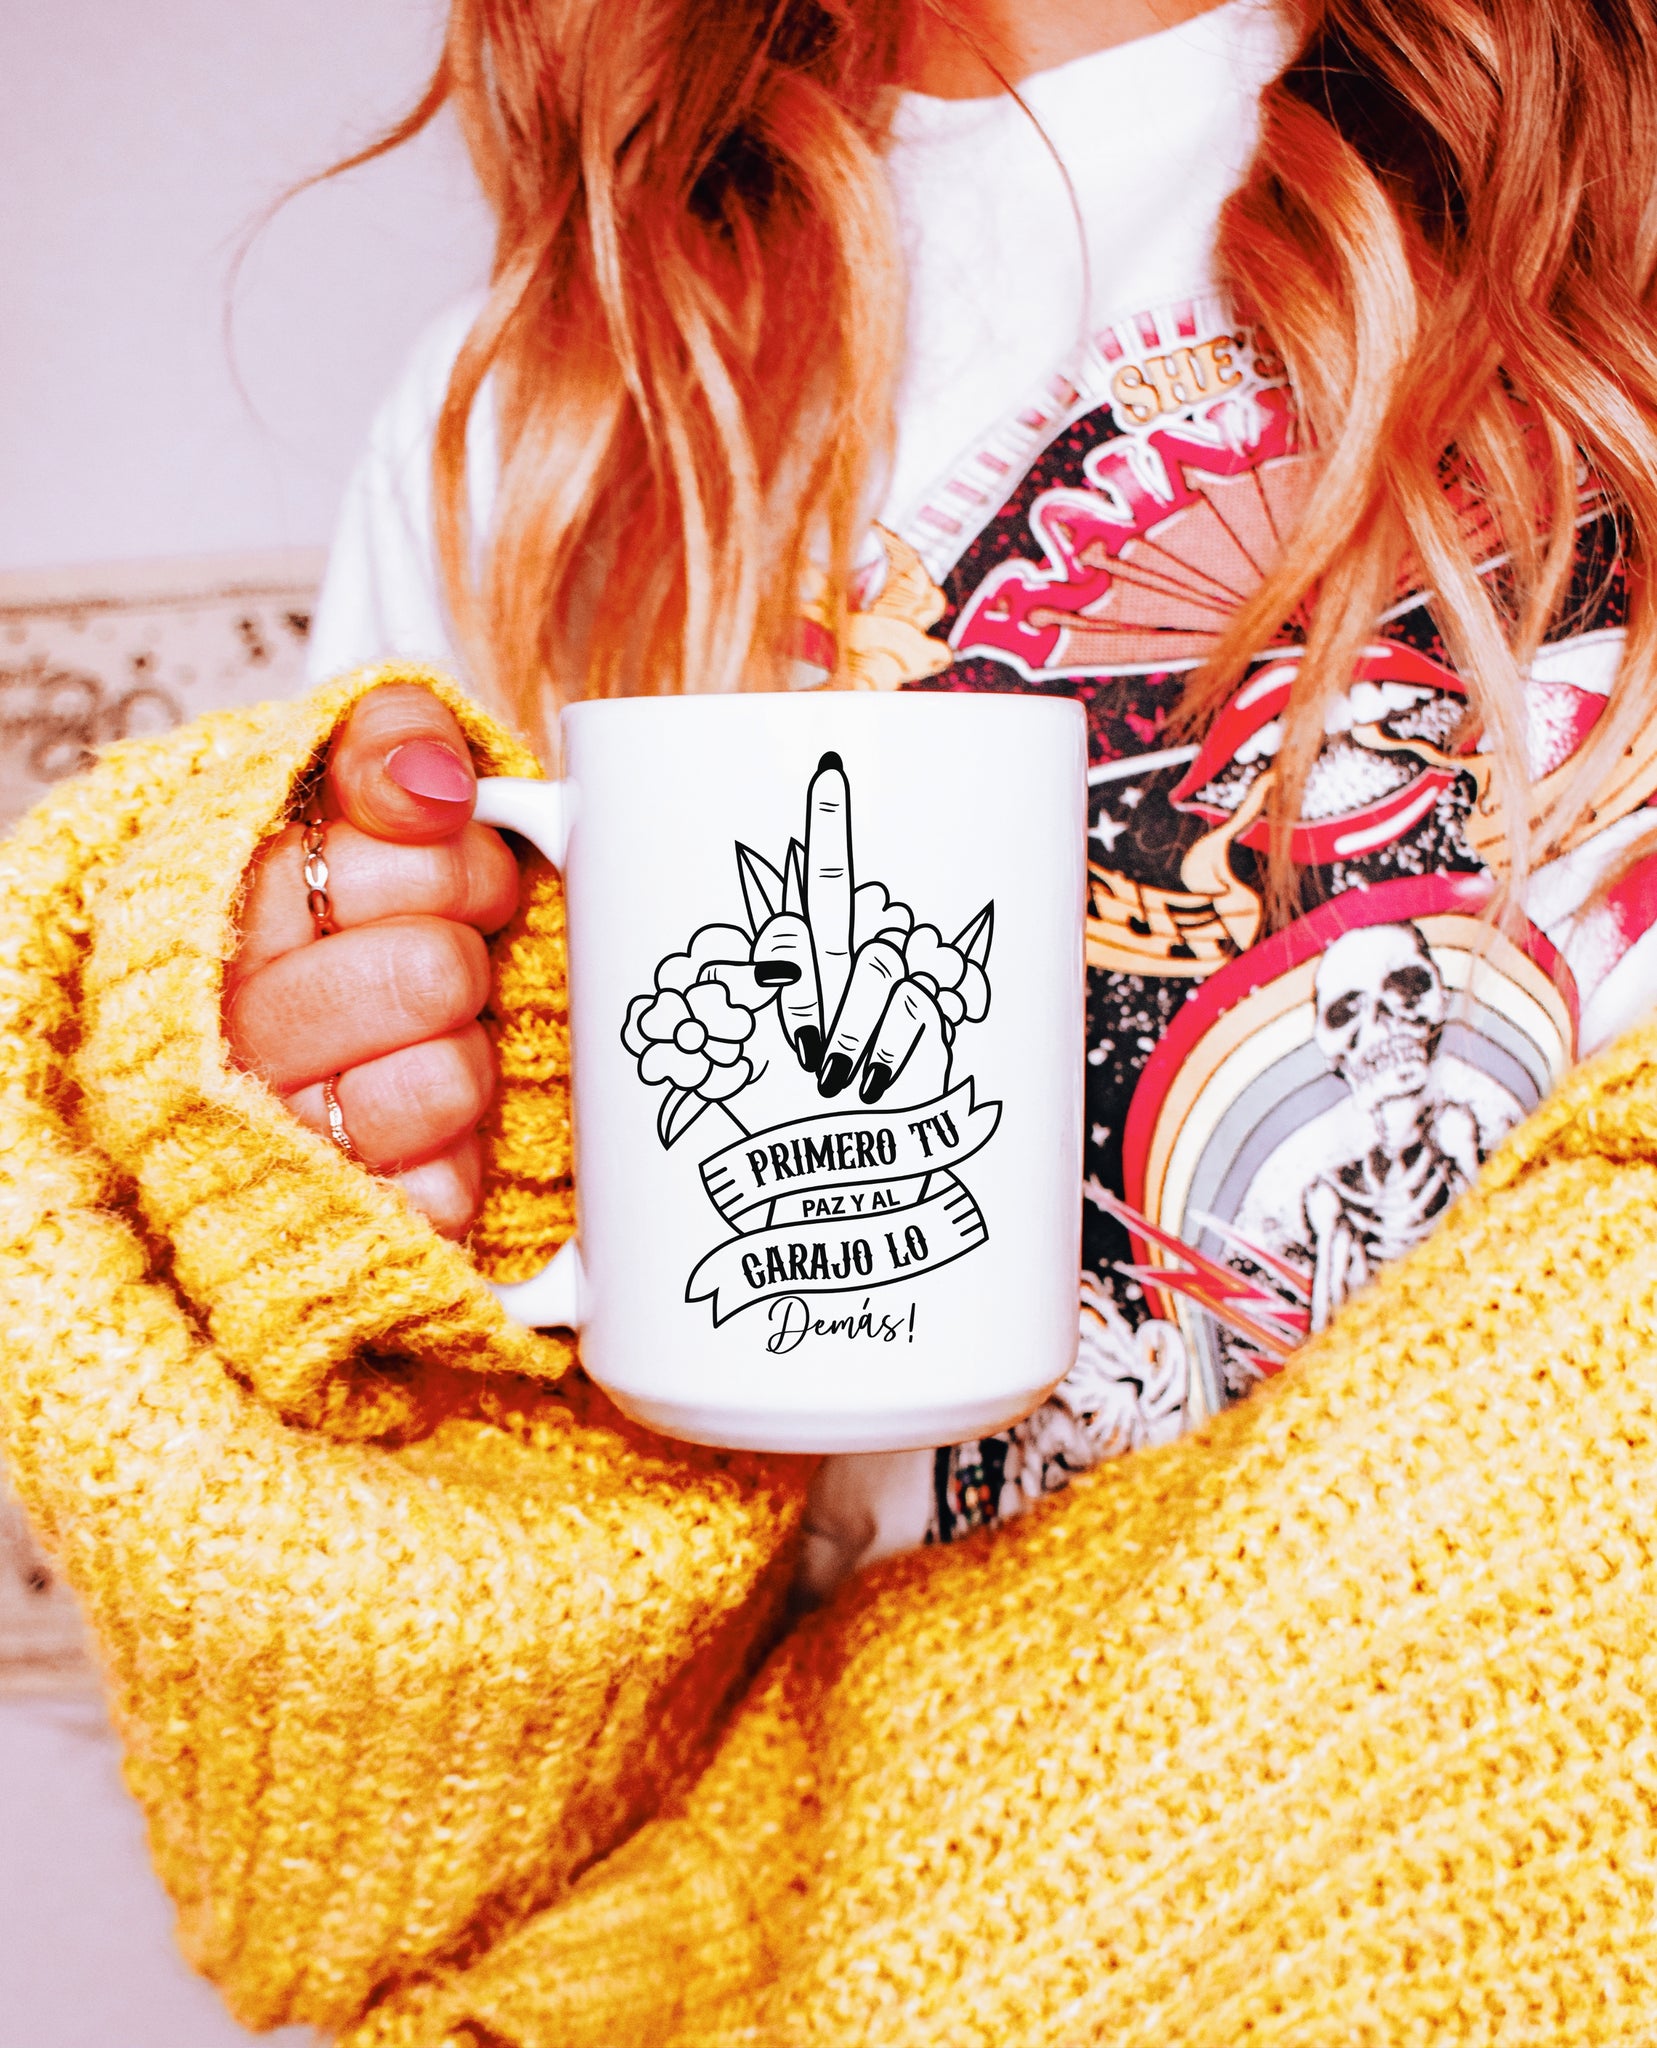 woman holding a Funny tall white mug featuring a raised middle finger and the message 'primero tu paz y al carajo lo demas’